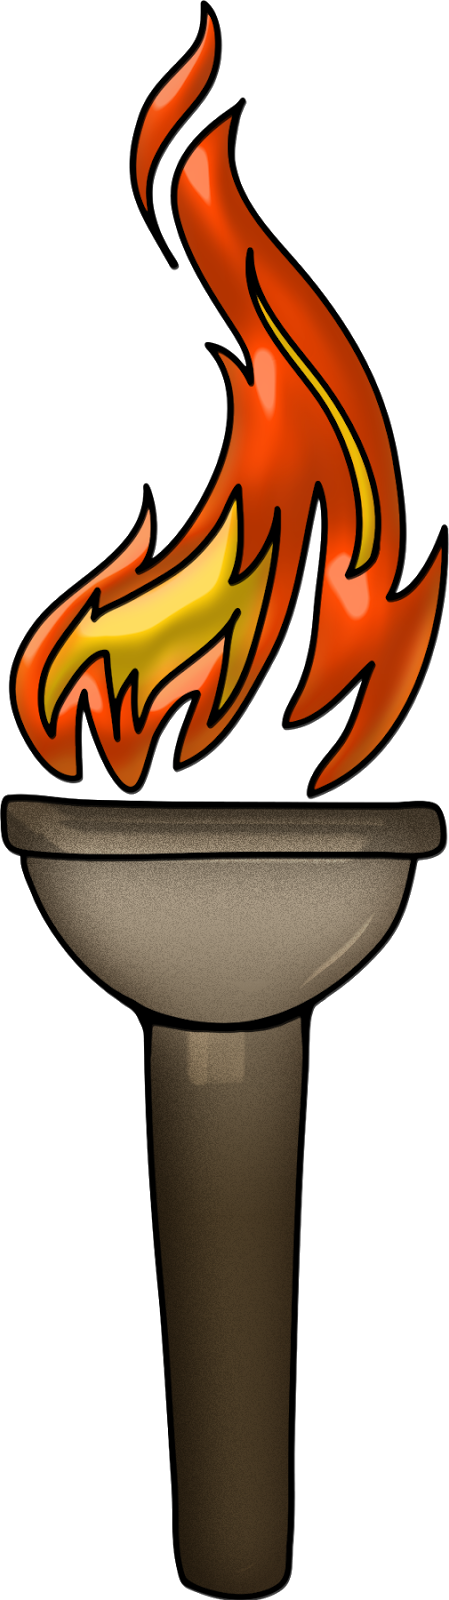 Wall Torch Sconce - Torch Clipart (449x1600)